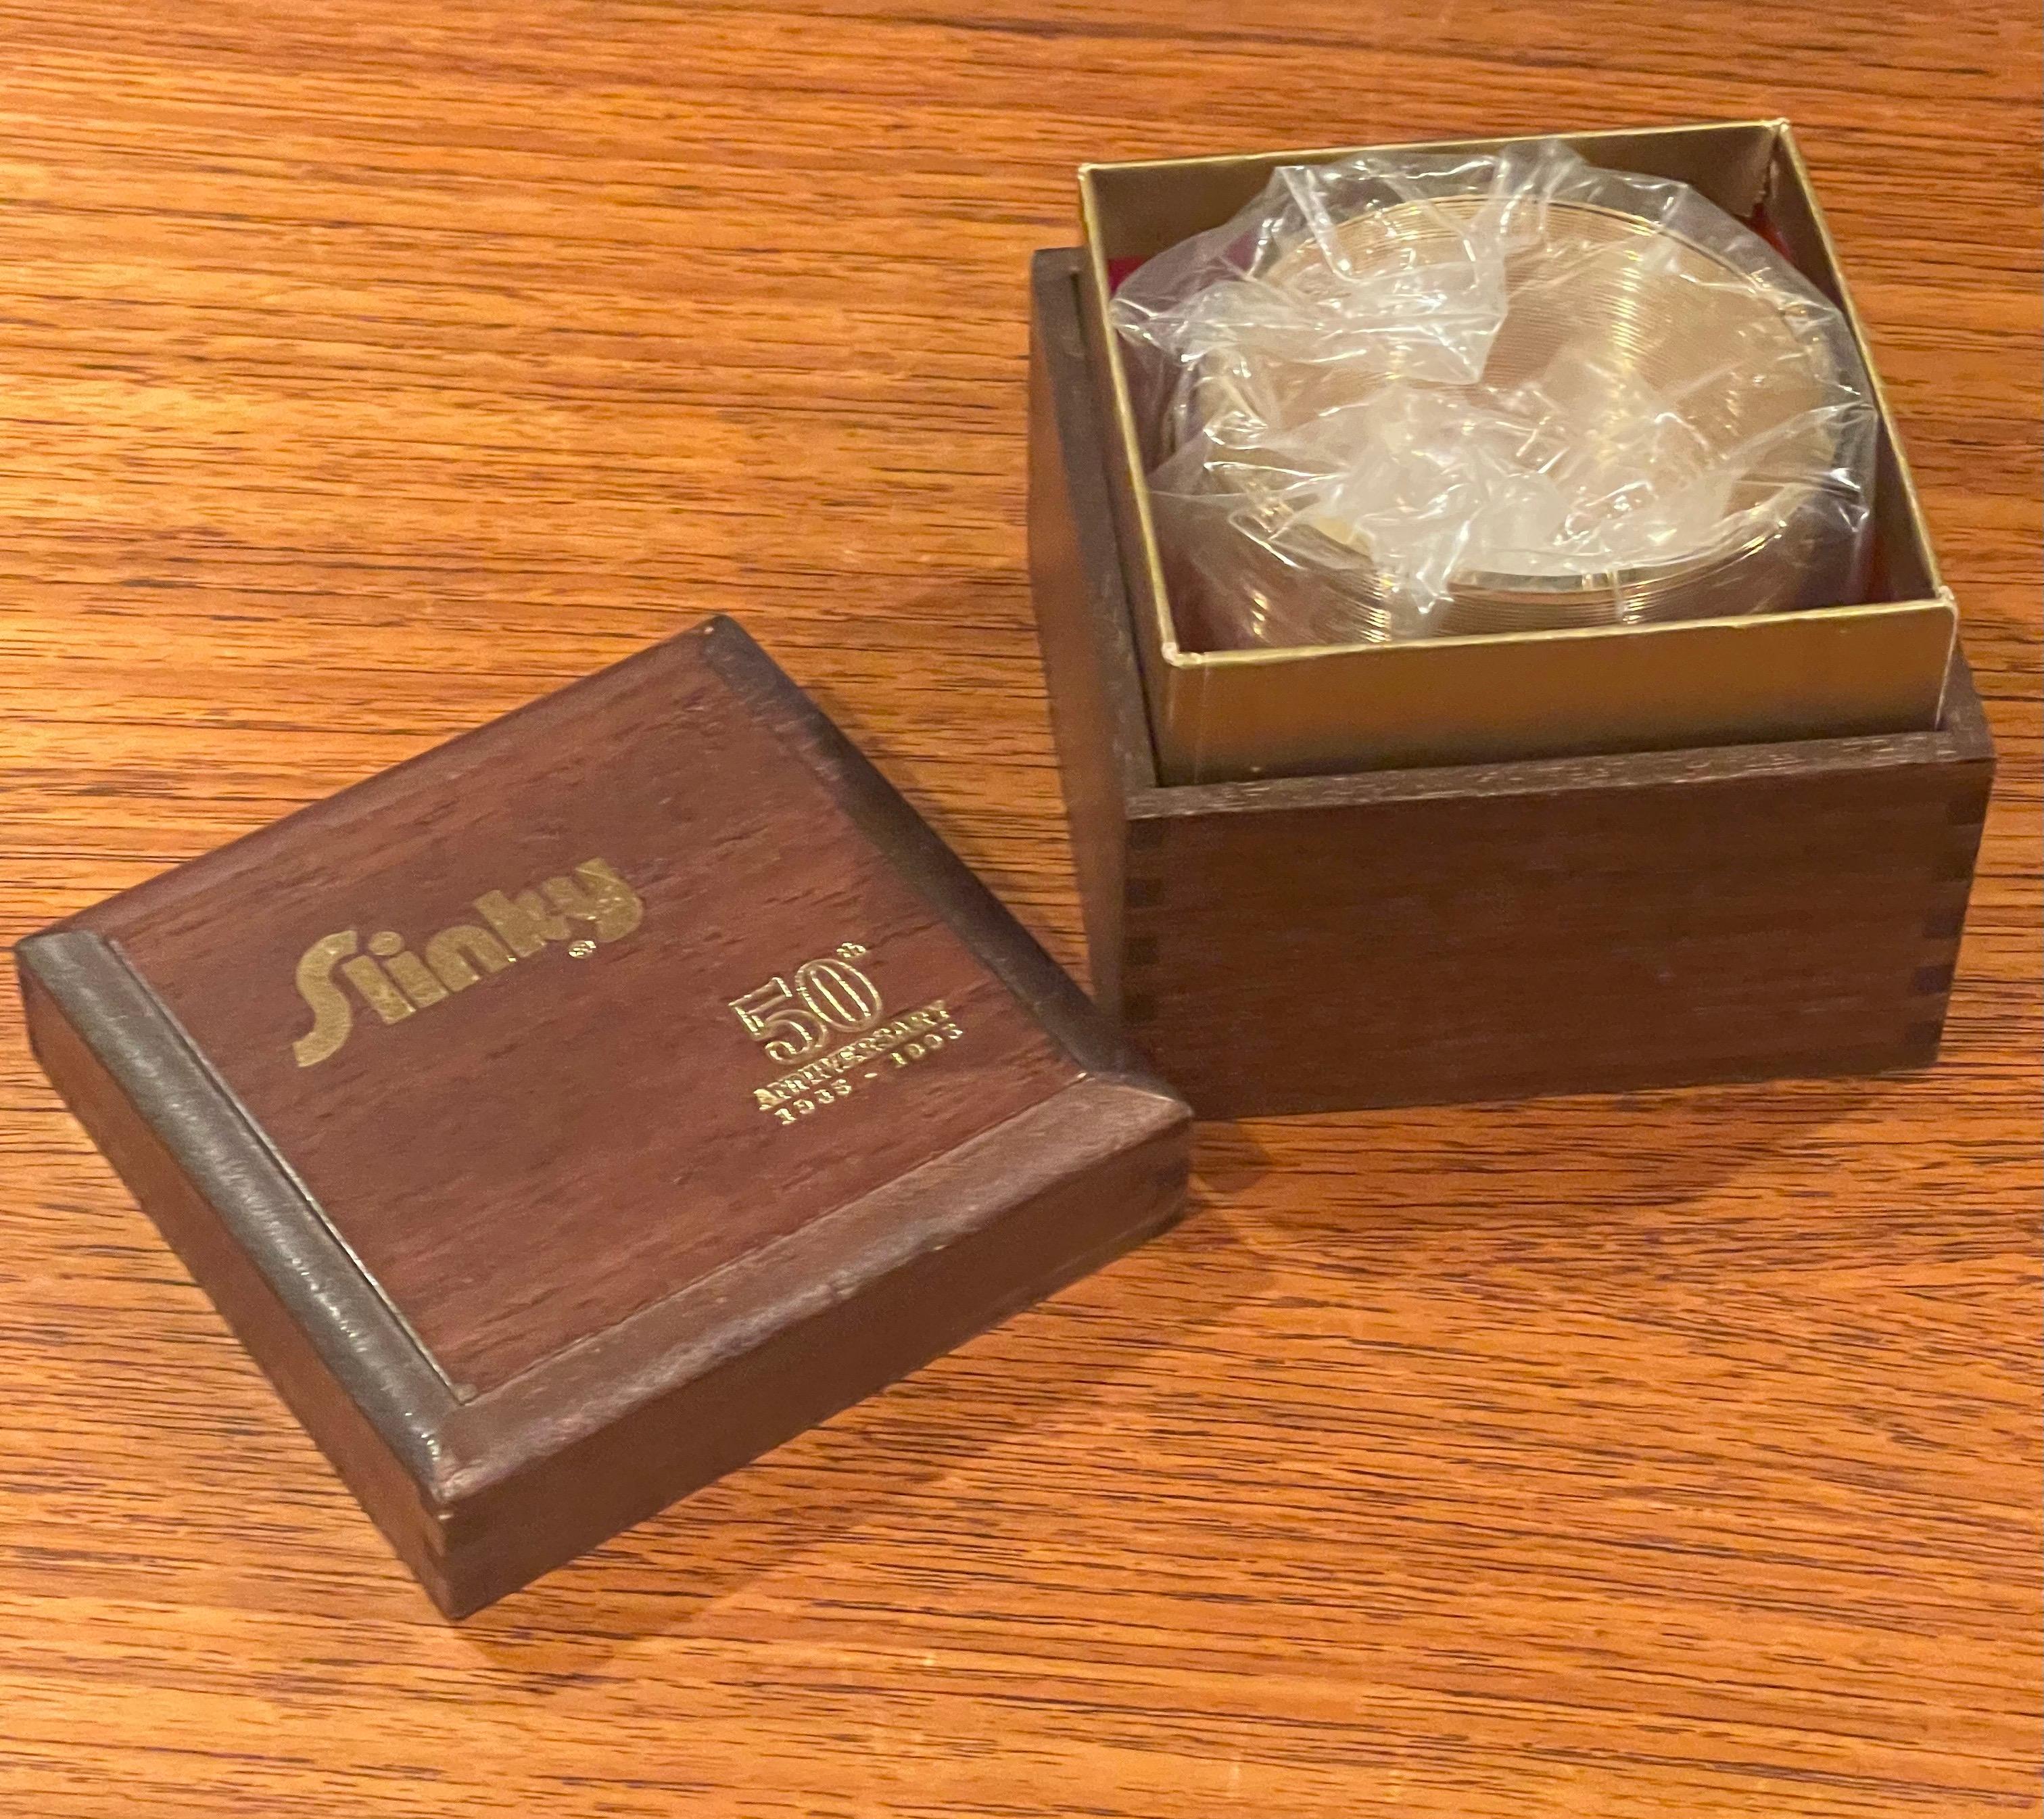 American 50th Anniversary Gold-Plated Slinky Toy in Wood Box